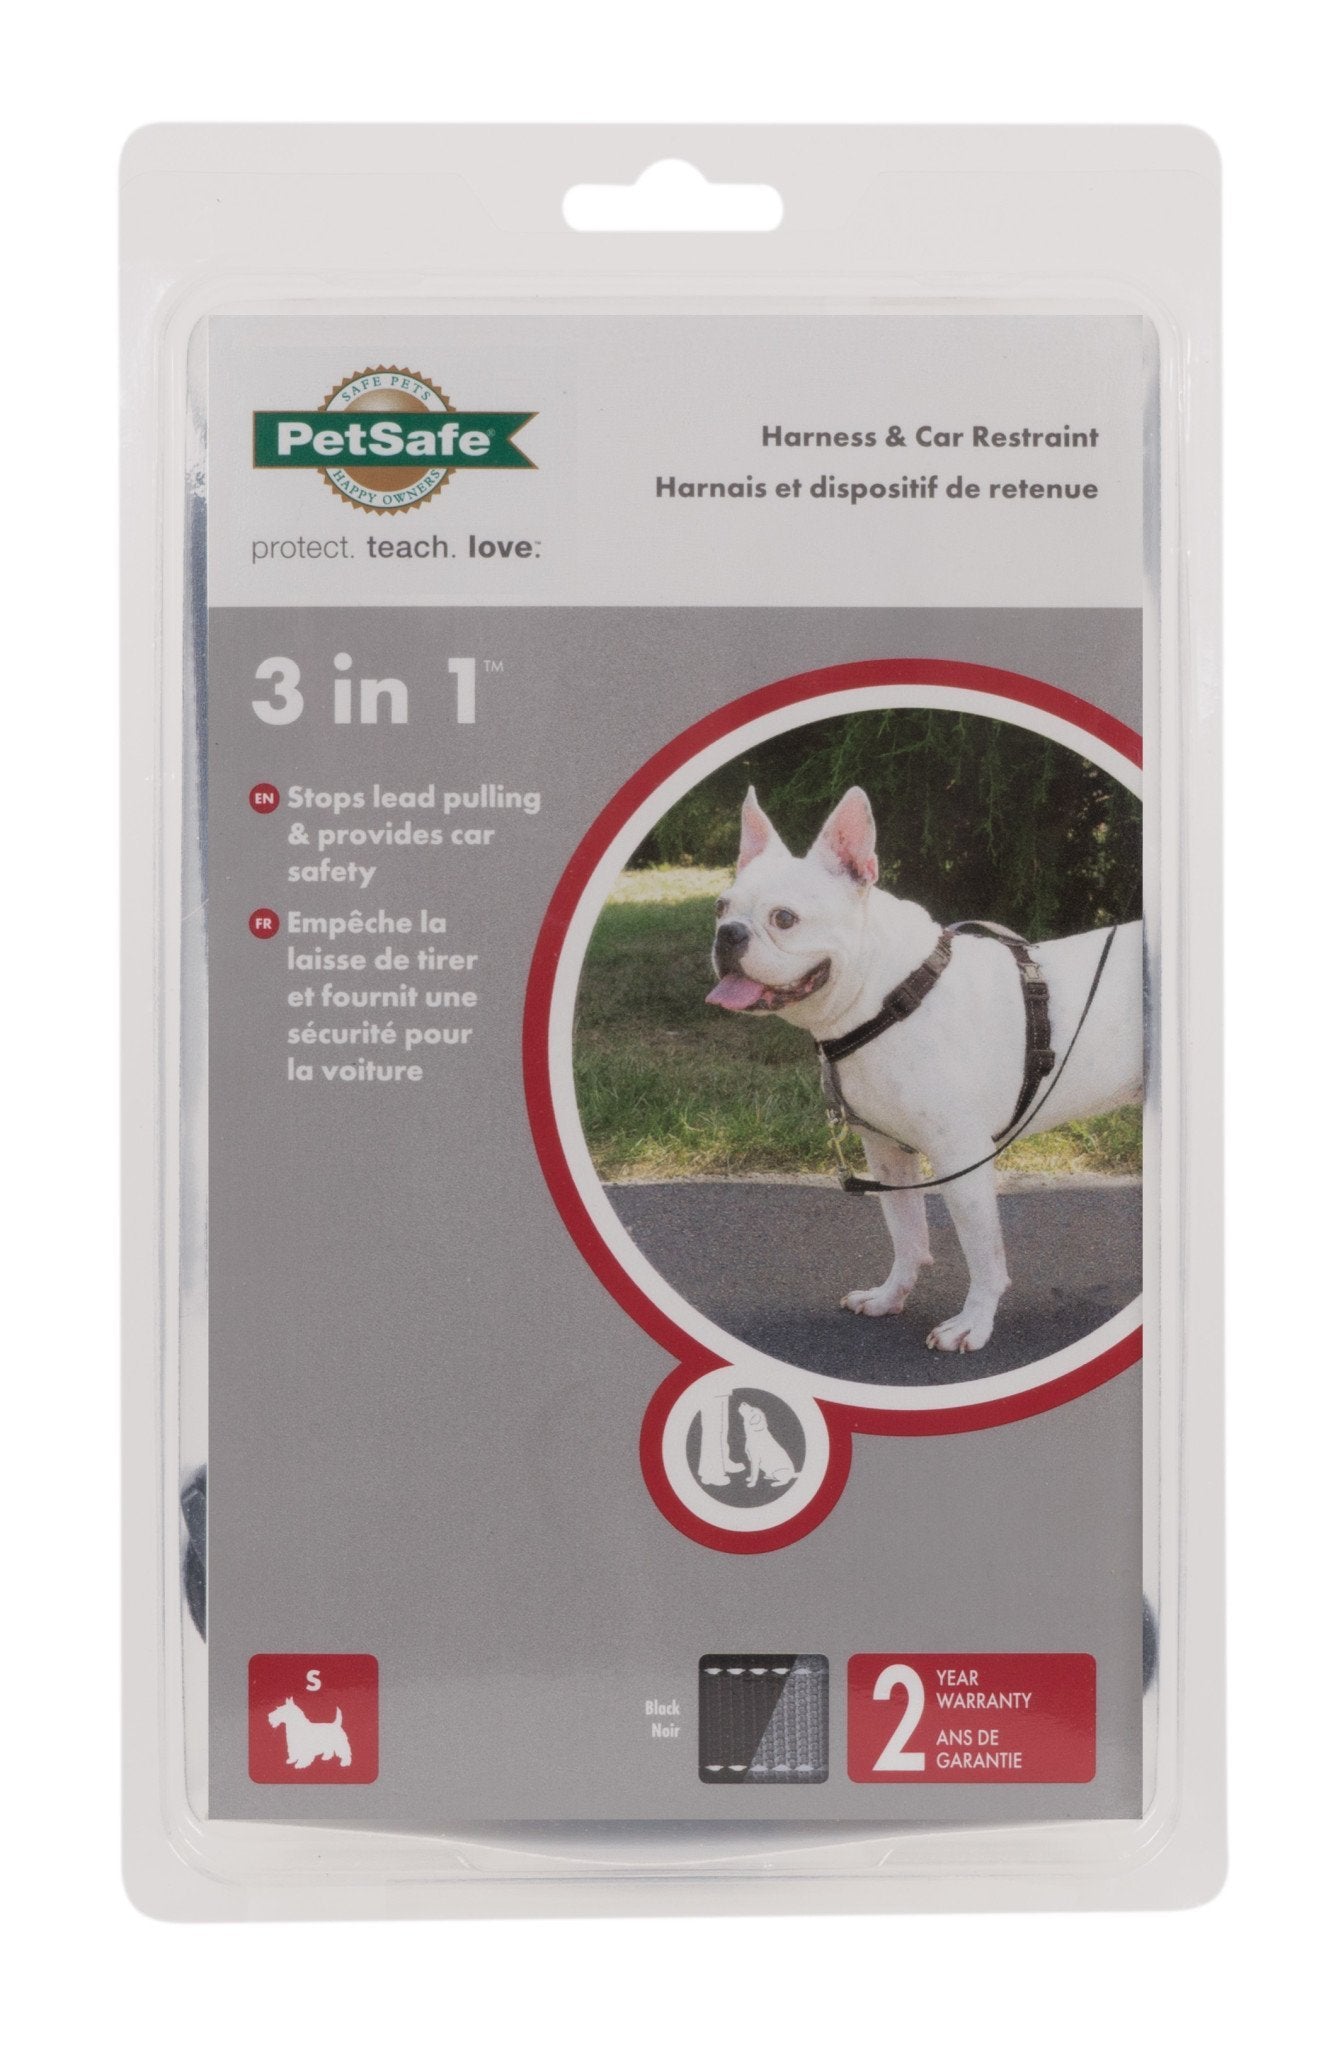 PetSafe® 3 in 1 Harness and Car Restraint, Black